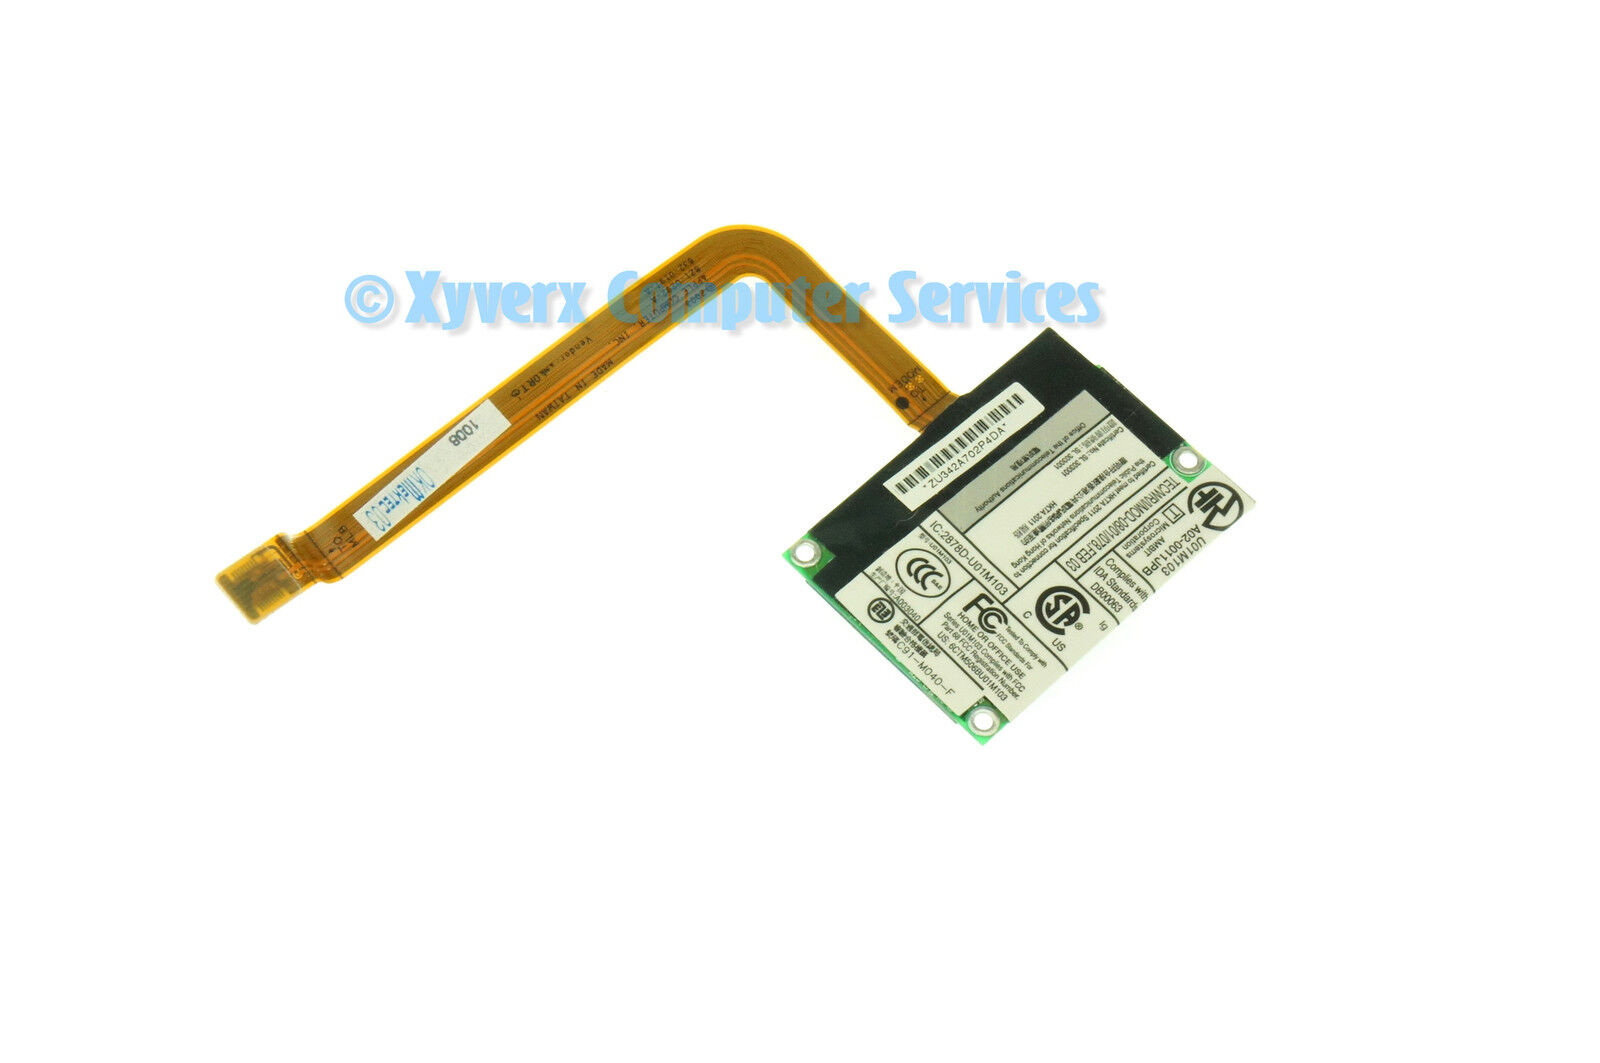 A02-0011JPB 821-0292-A GENUINE APPLE MODEM CARD WITH CABLE A1046 EMC 1960 SERIES